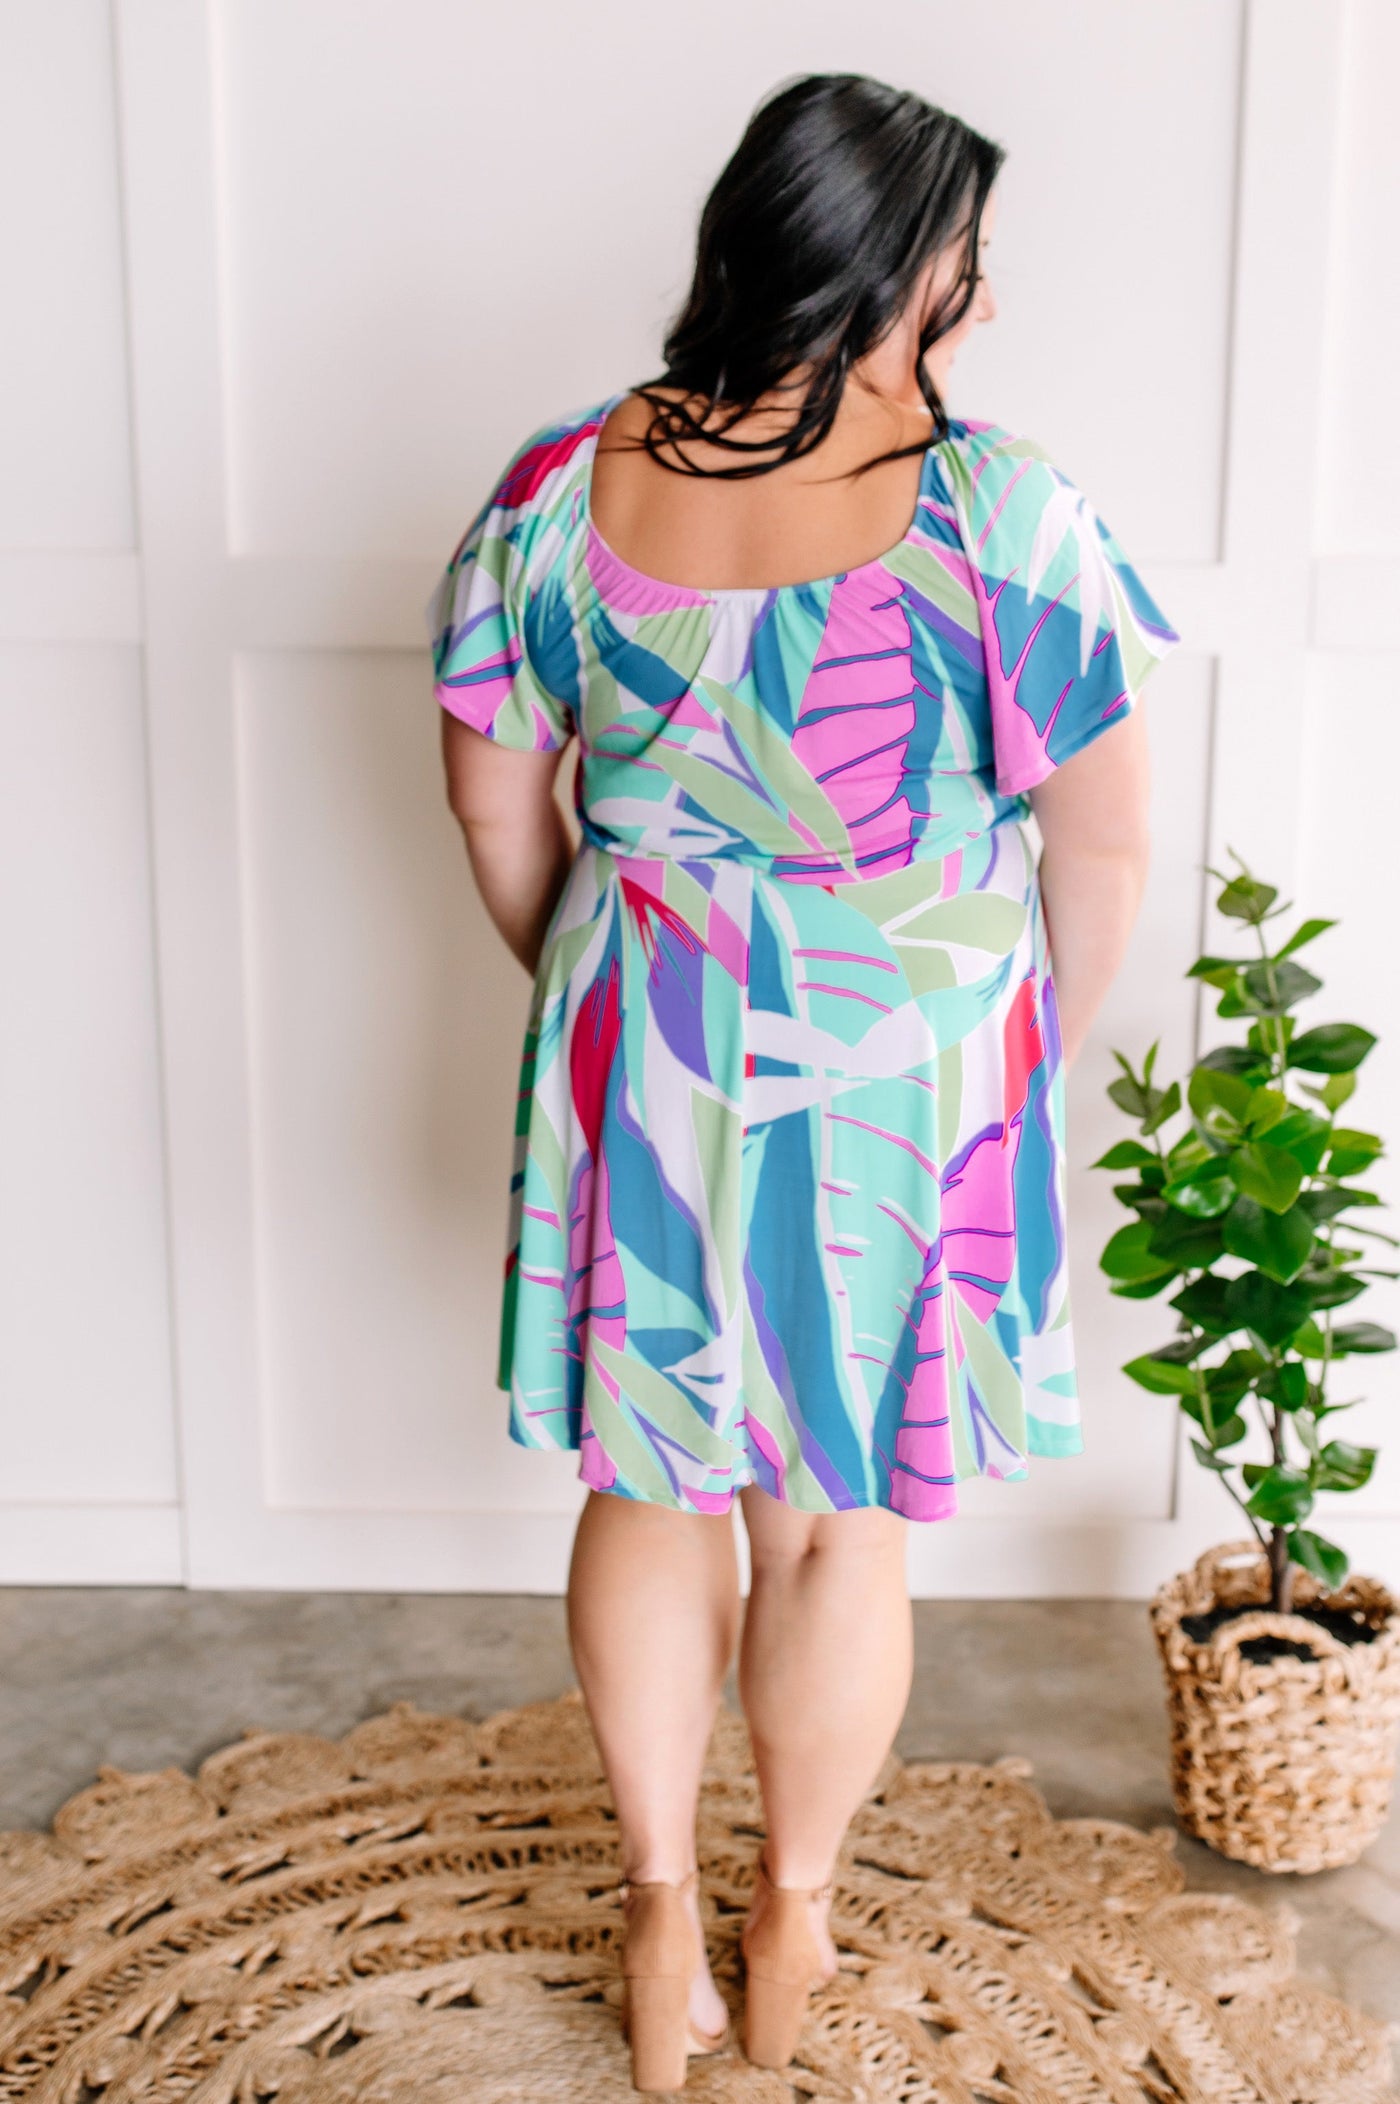 Stretchy Dress With Attached Shorts In Vibrant Colors